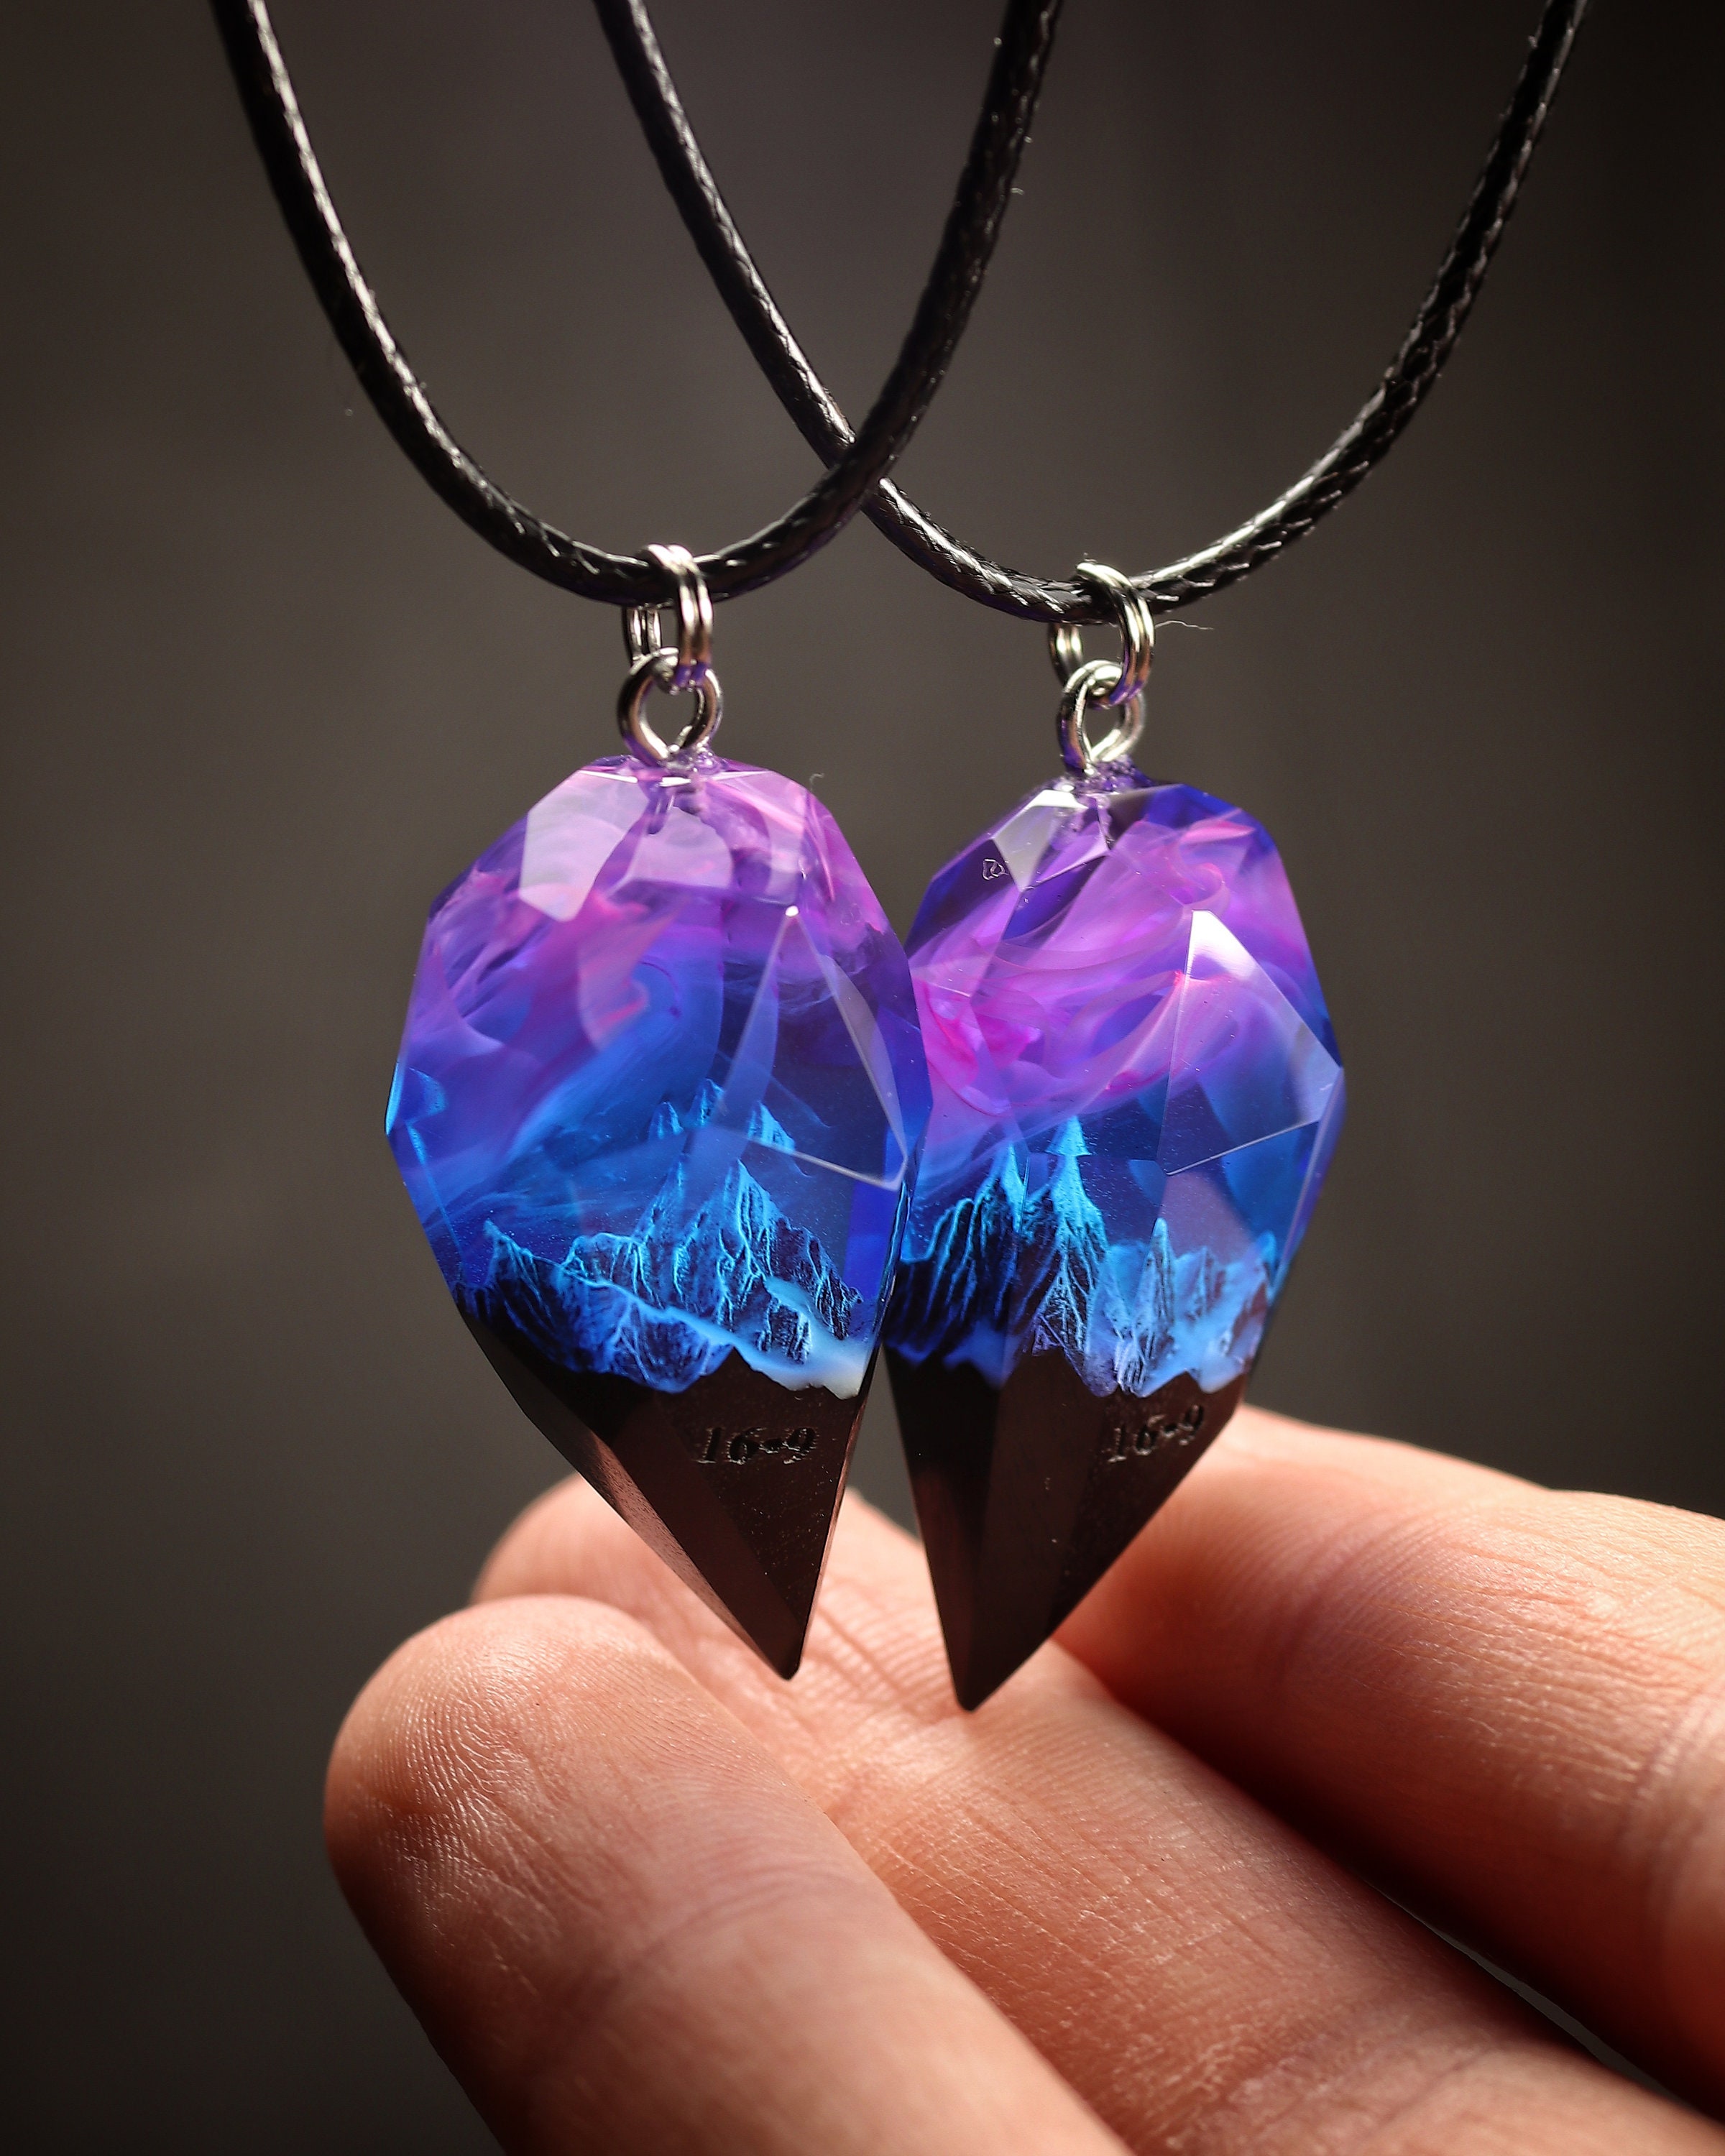 Resin with Thermochromic Pigment, Heart Pendant and Necklace Set